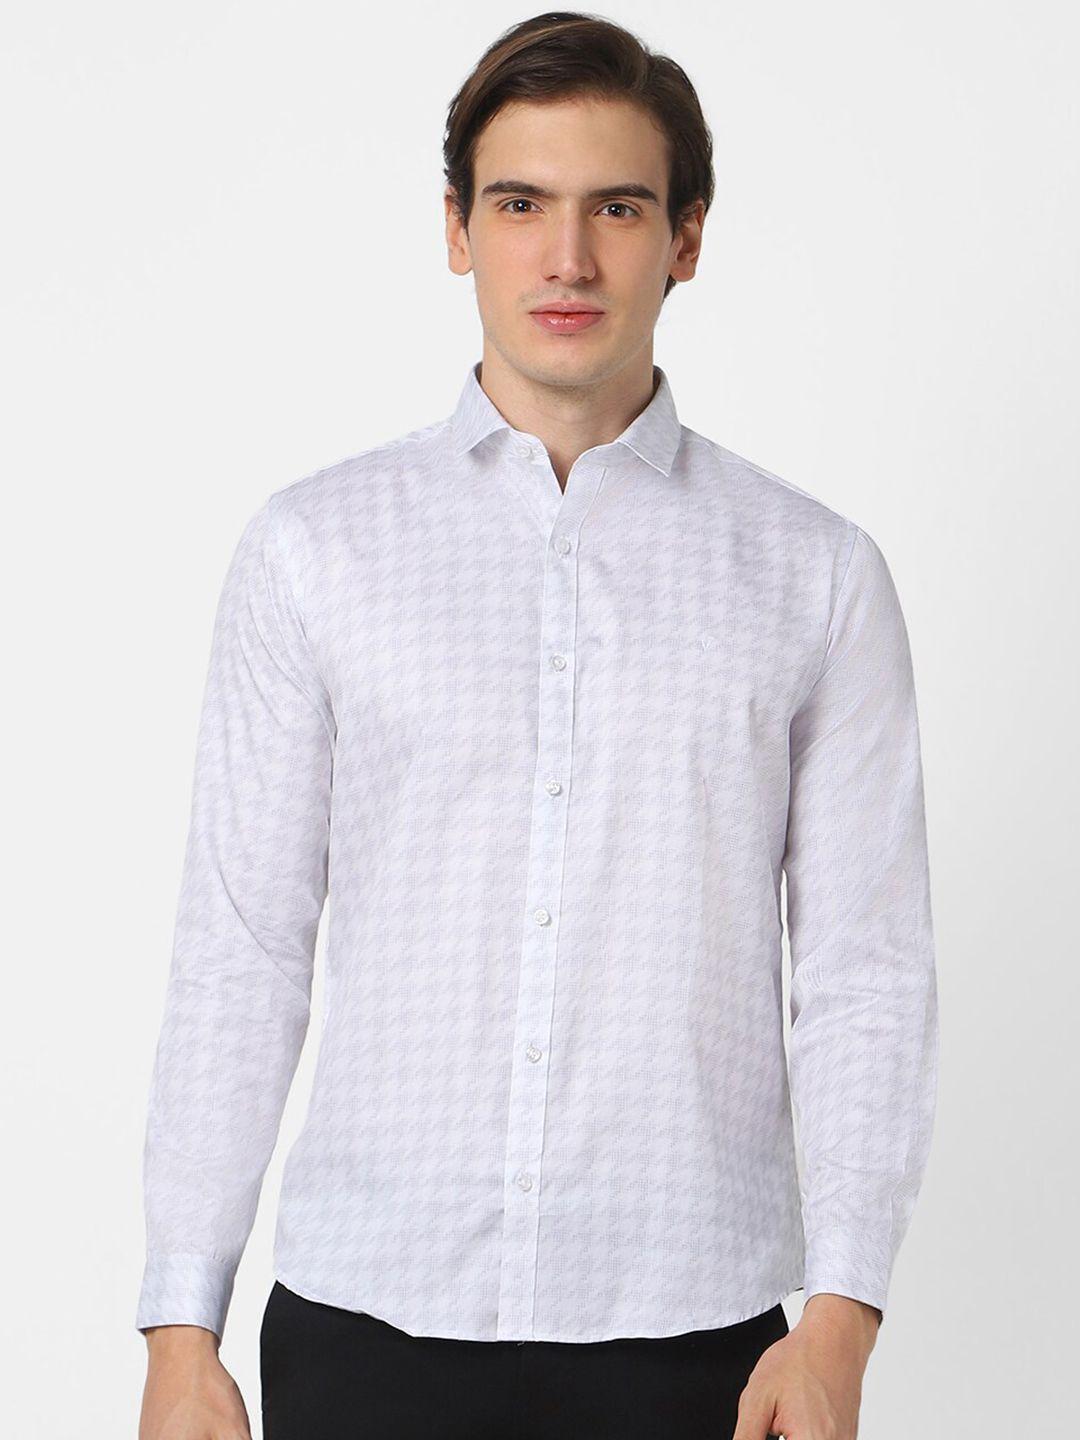 v-dot-abstract-printed-pure-cotton-slim-fit-casual-shirt